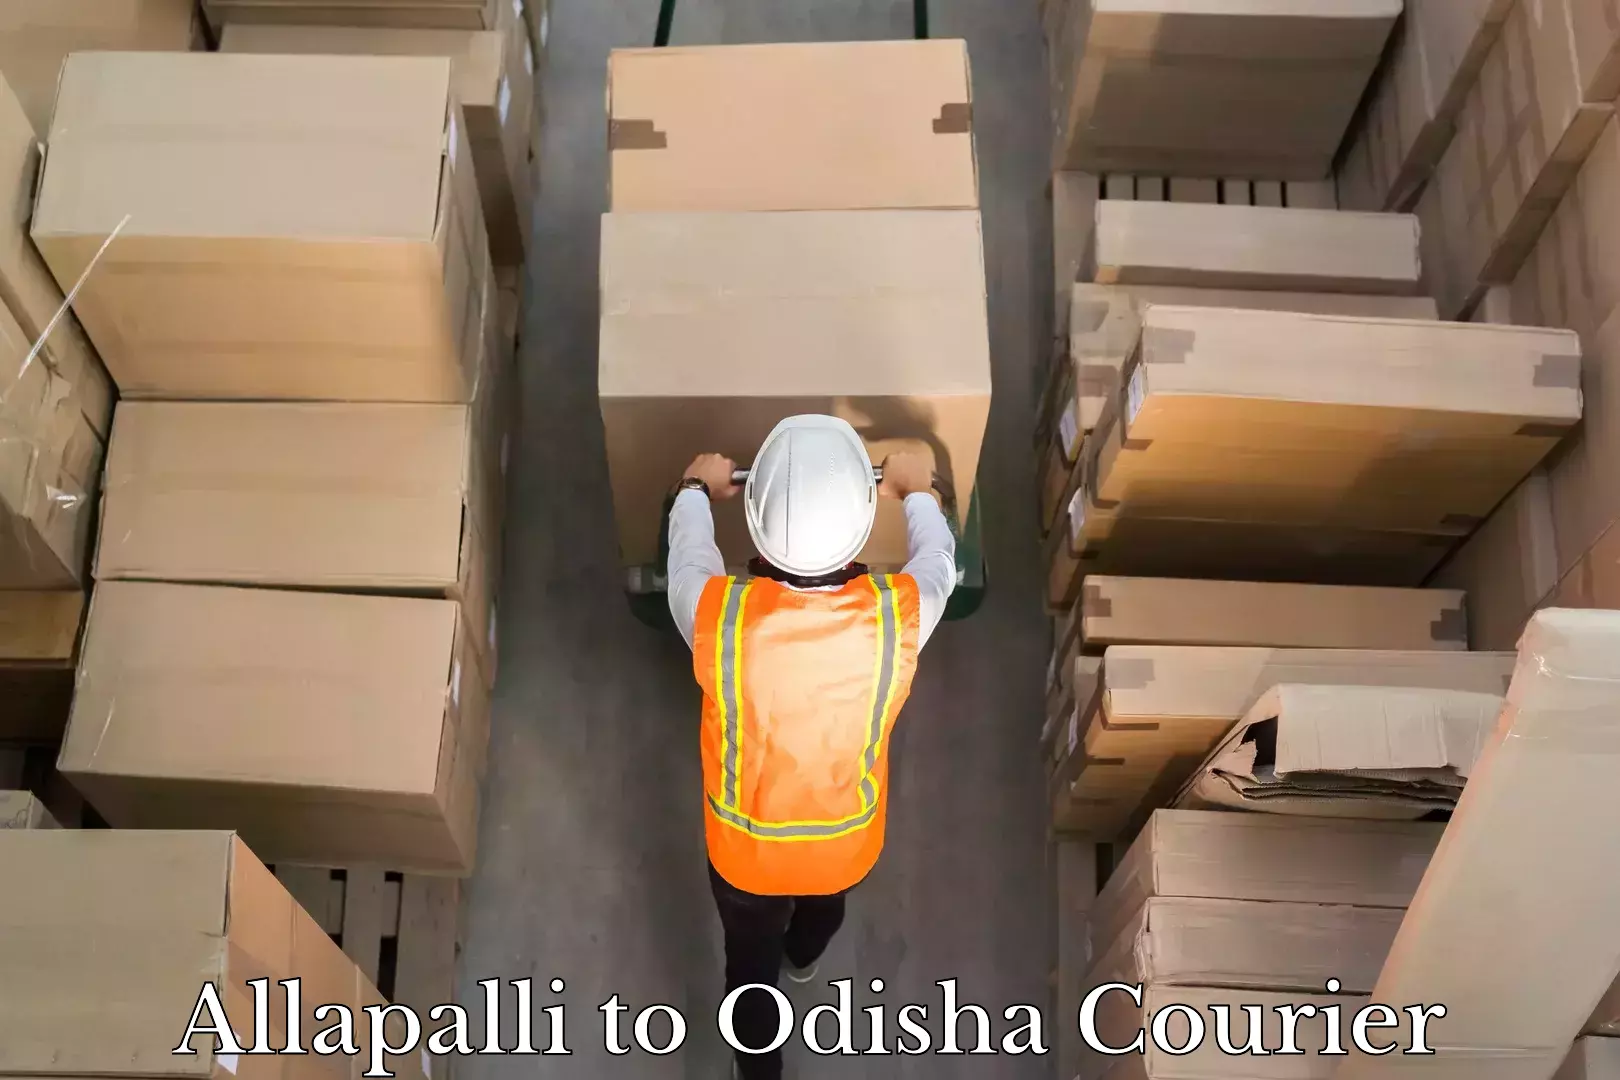 Sustainable delivery practices Allapalli to Odisha